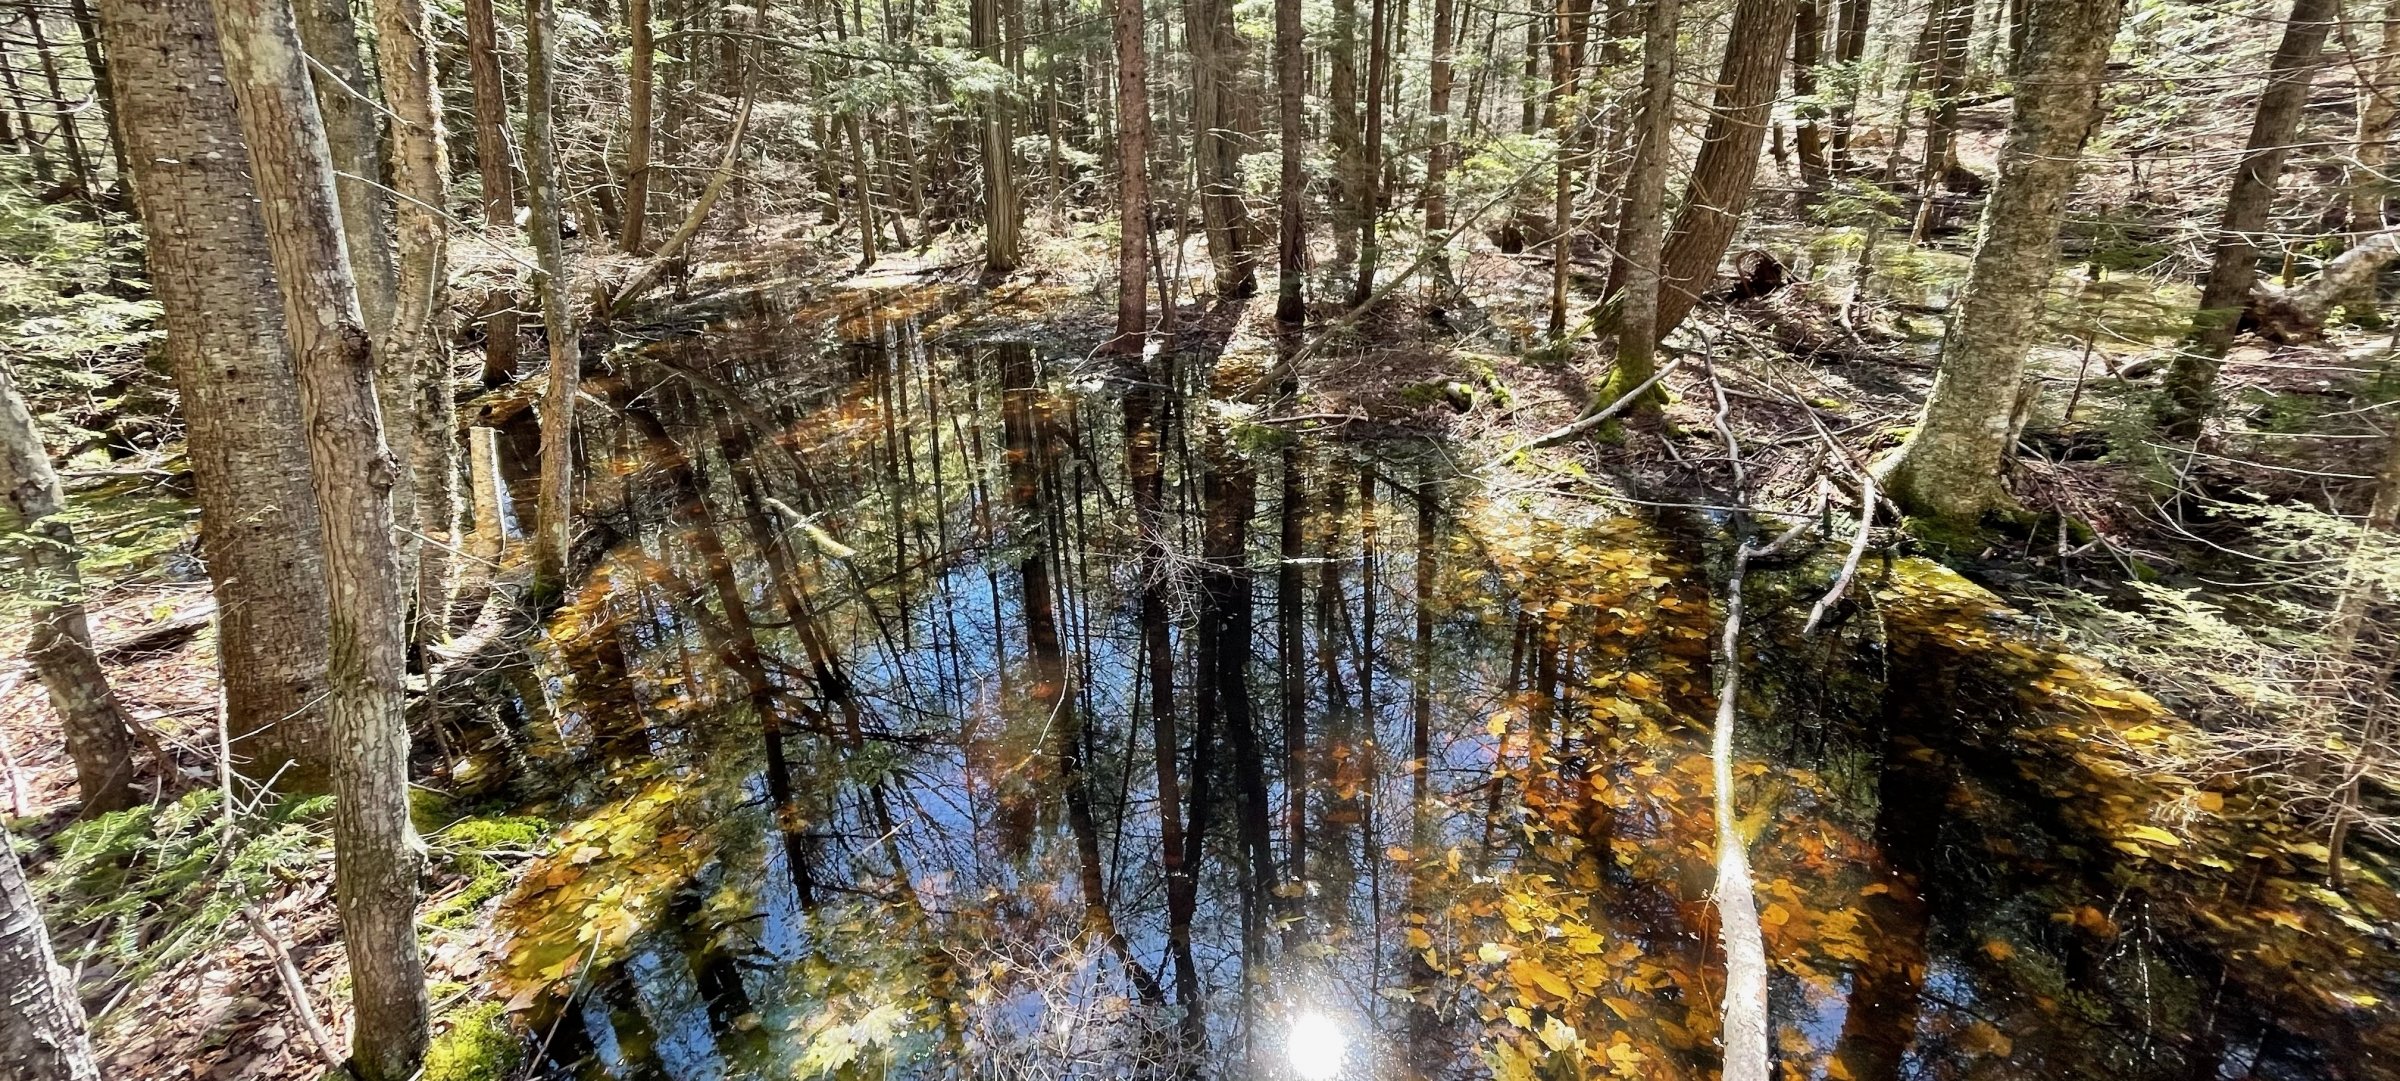 A pool of water in the forest.